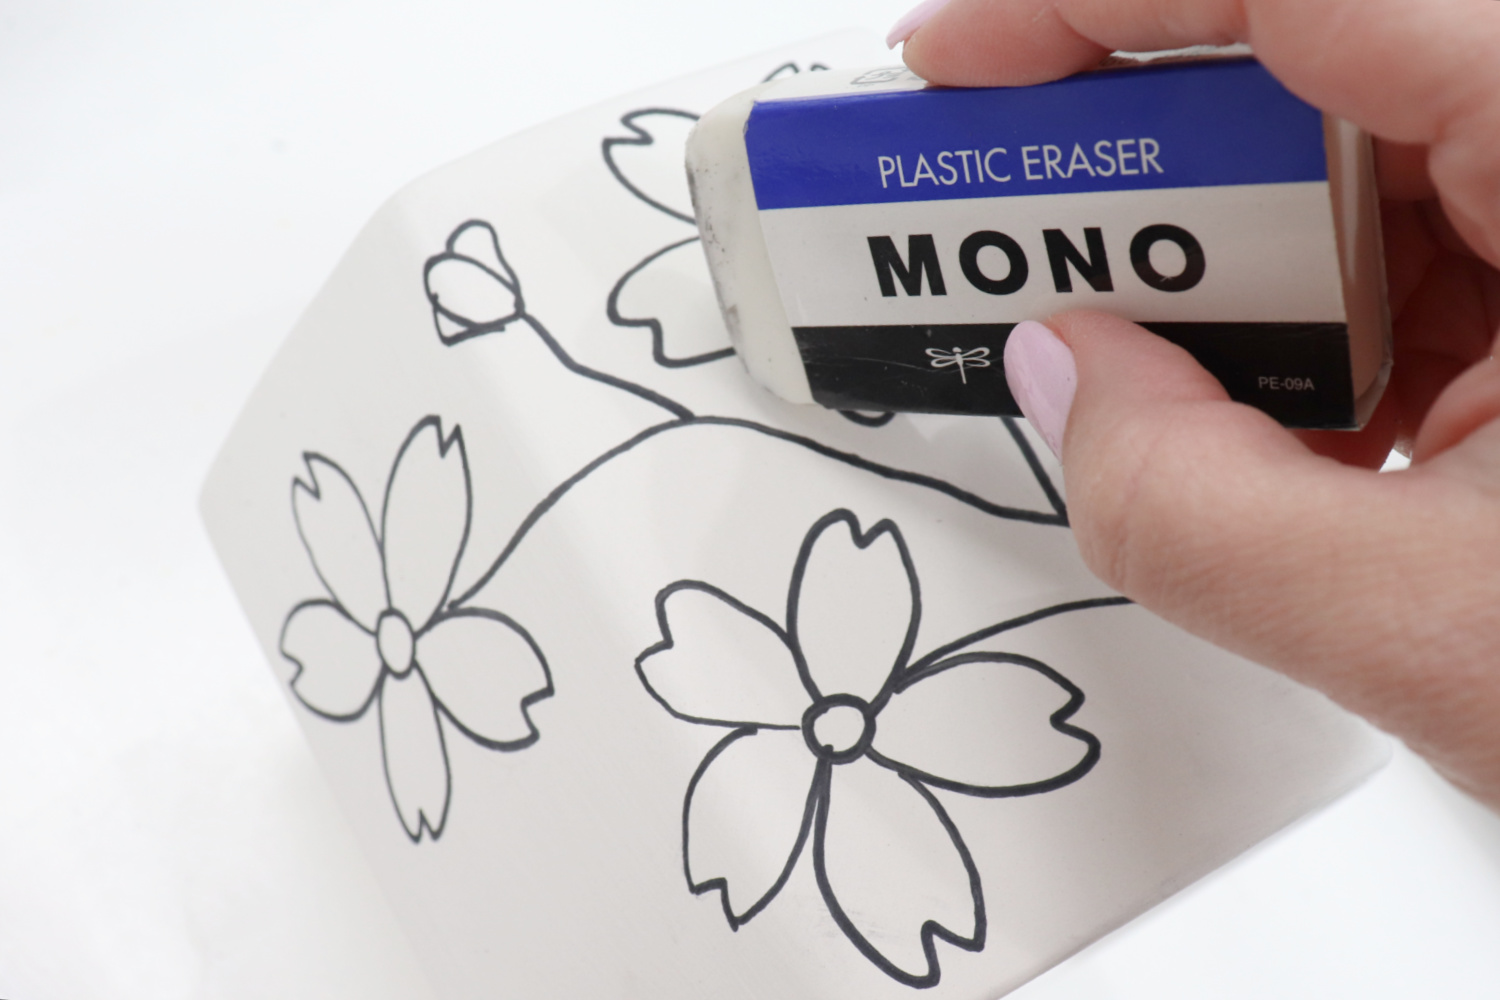 Image contains Amy’s hand holding a MONO Eraser, removing pencil lines from the white planter.